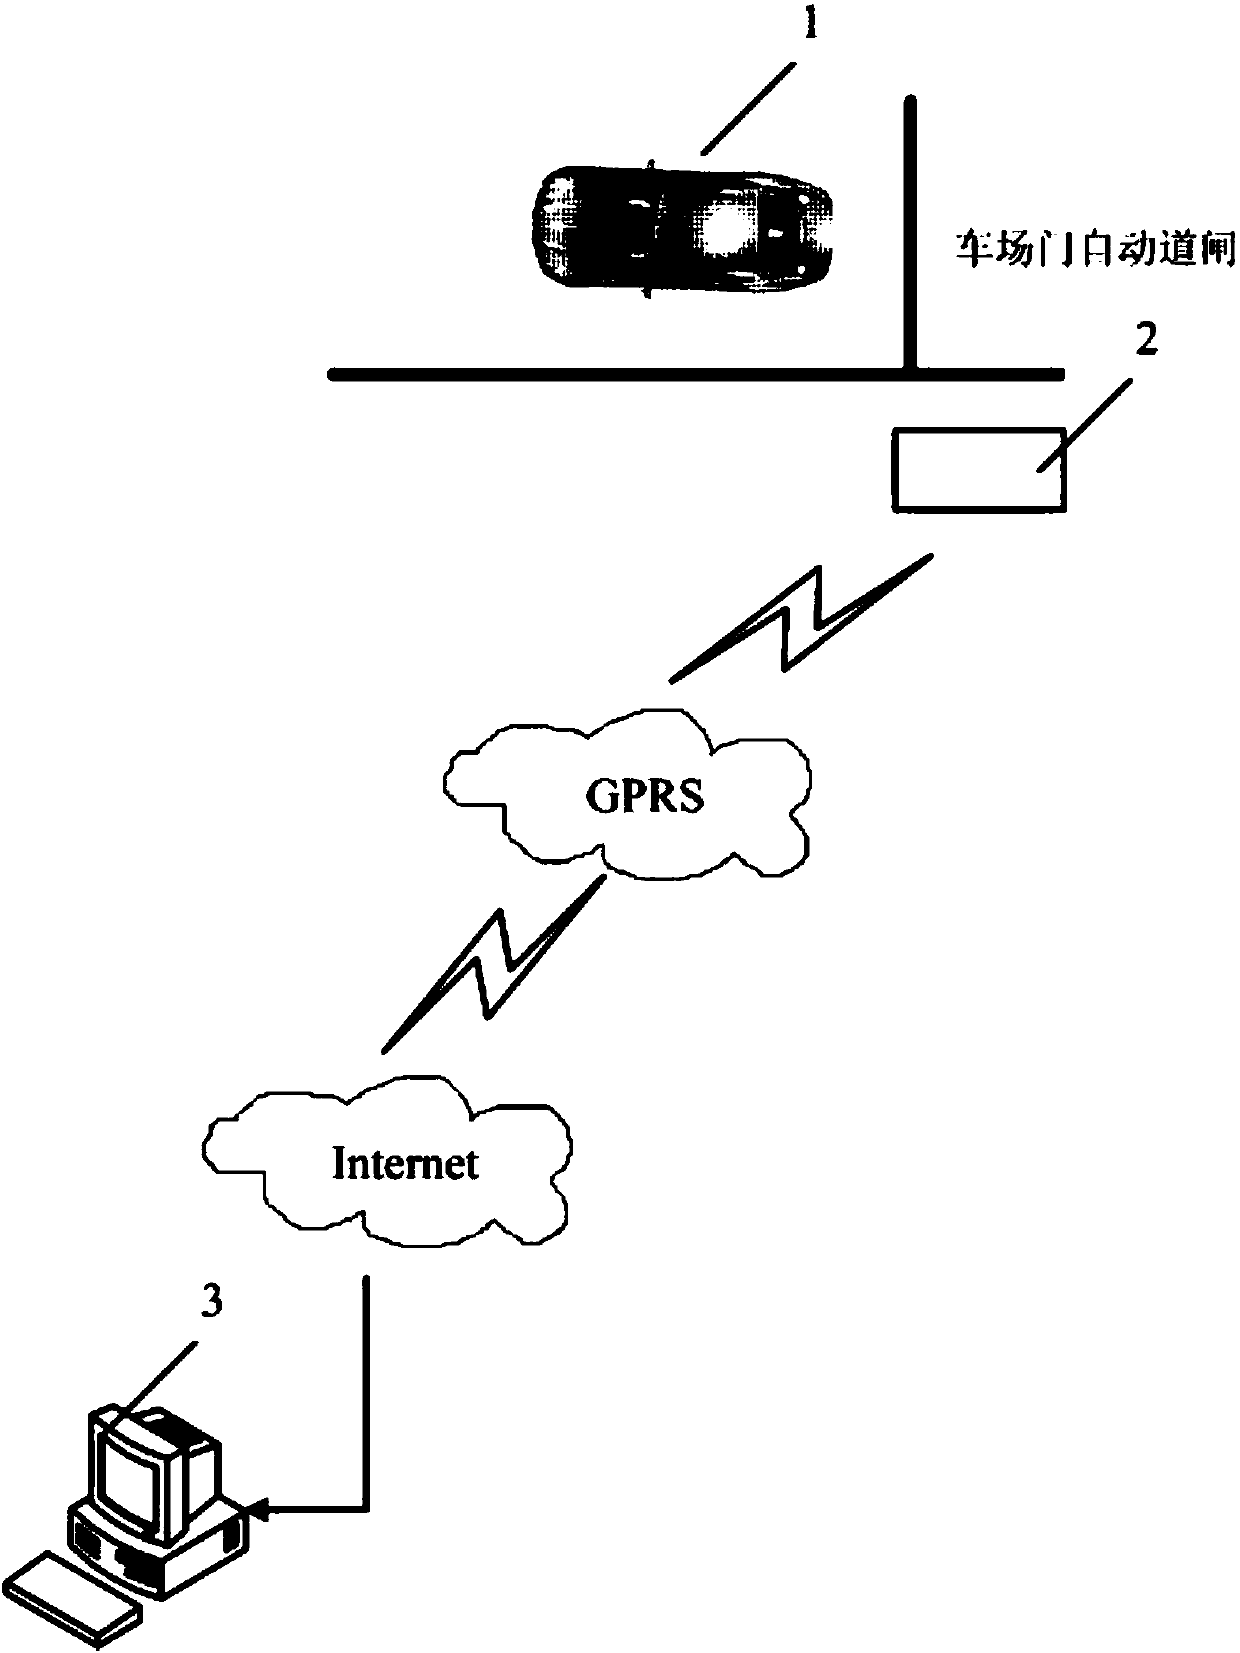 Vehicle anti-theft data acquisition and analysis system